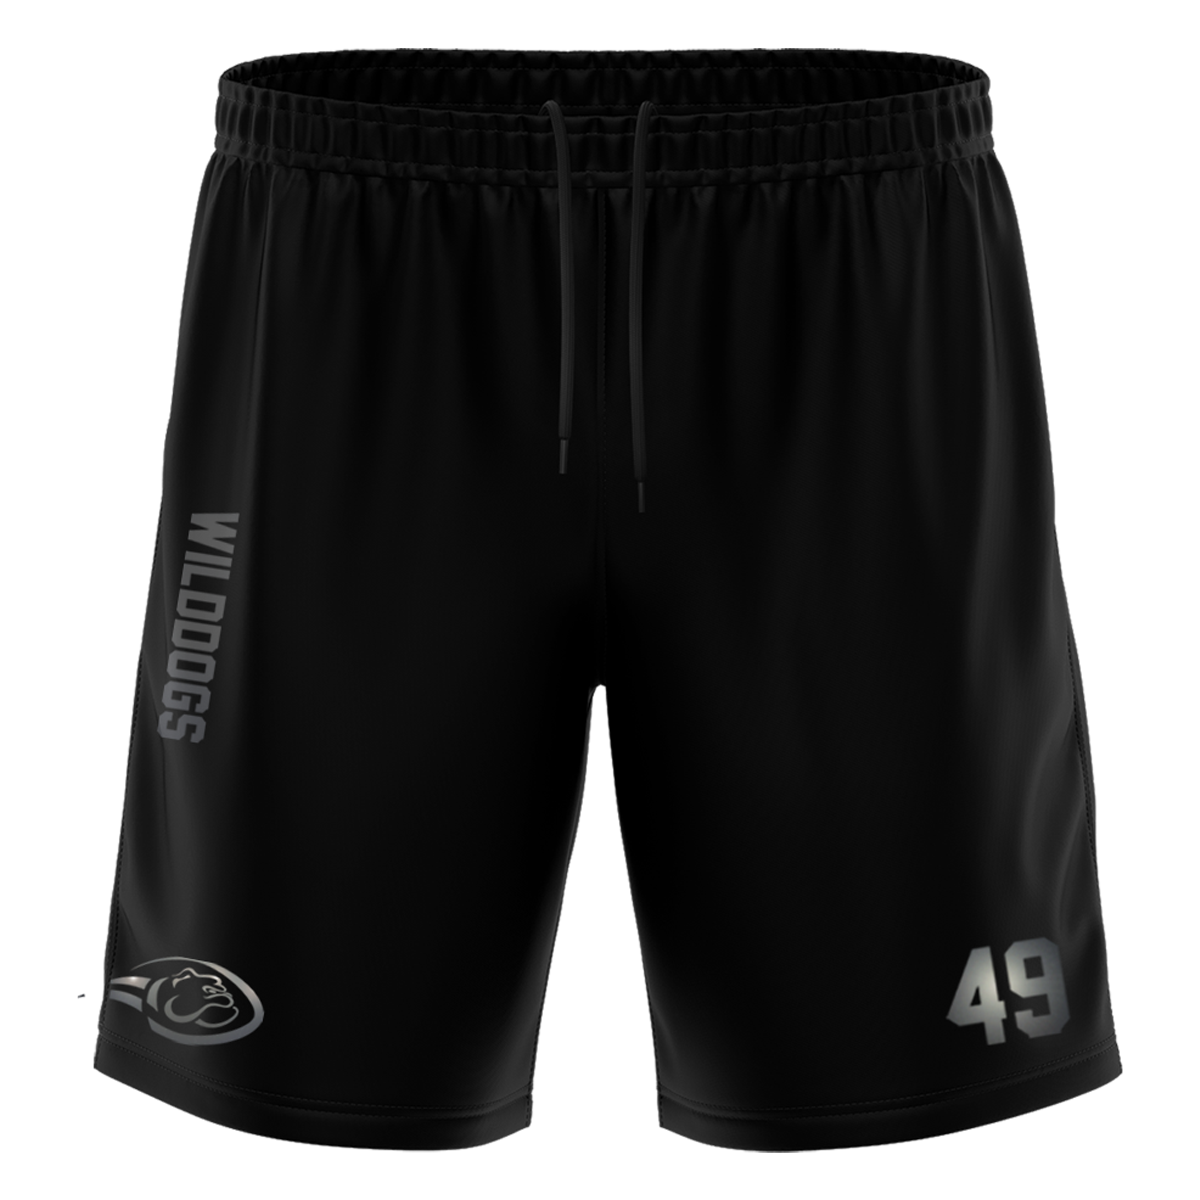 Wilddogs "Blackline" Training Short with Playernumber or Initials